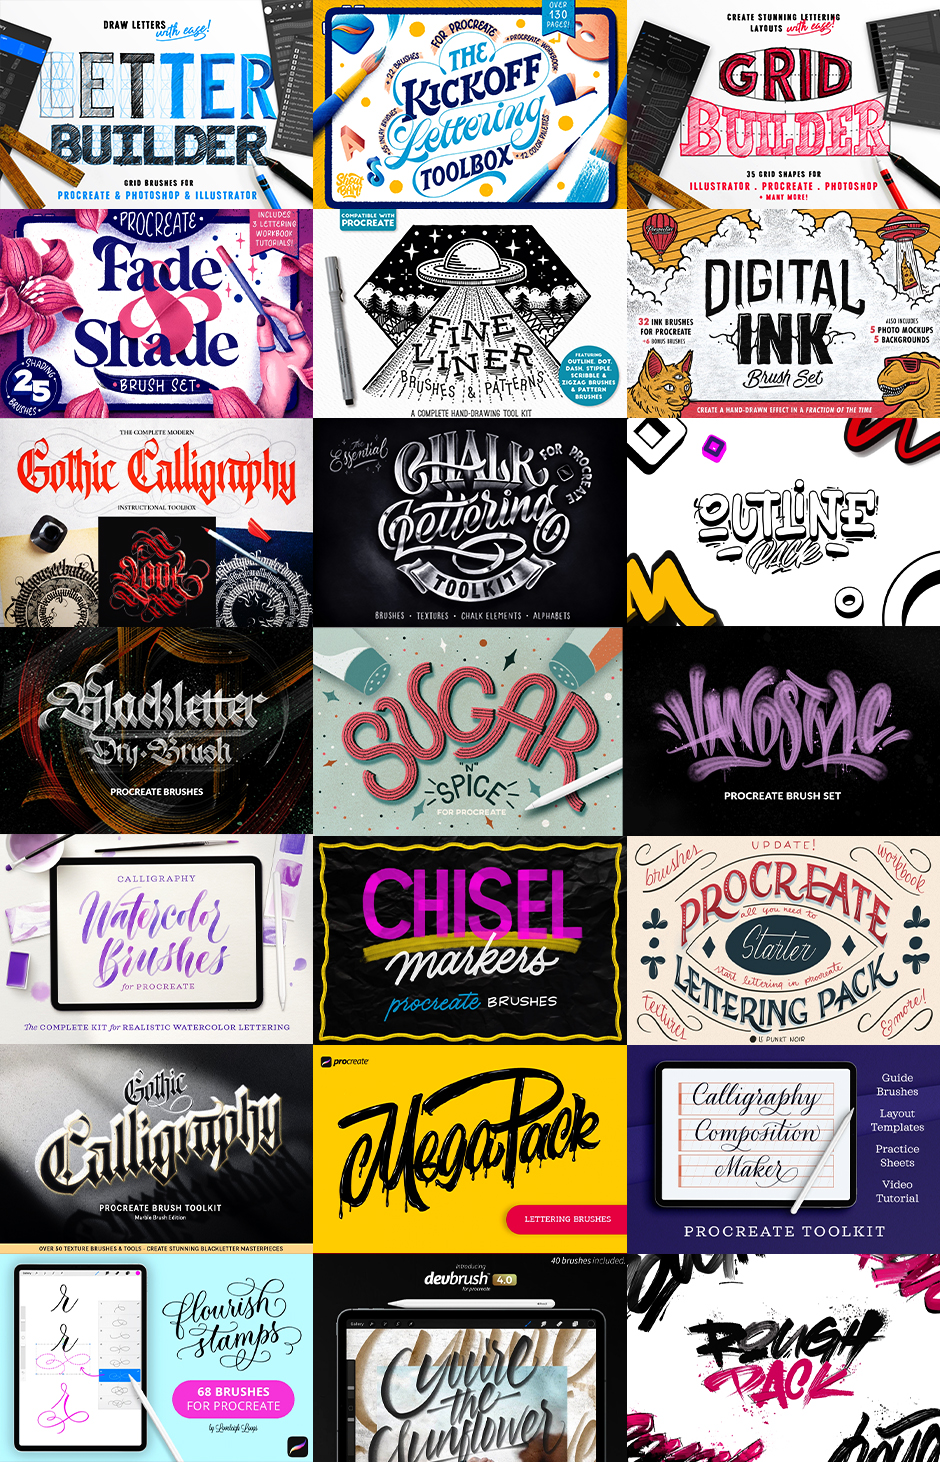 Lettering-Daily: The Colossal Procreate Brush Bundle